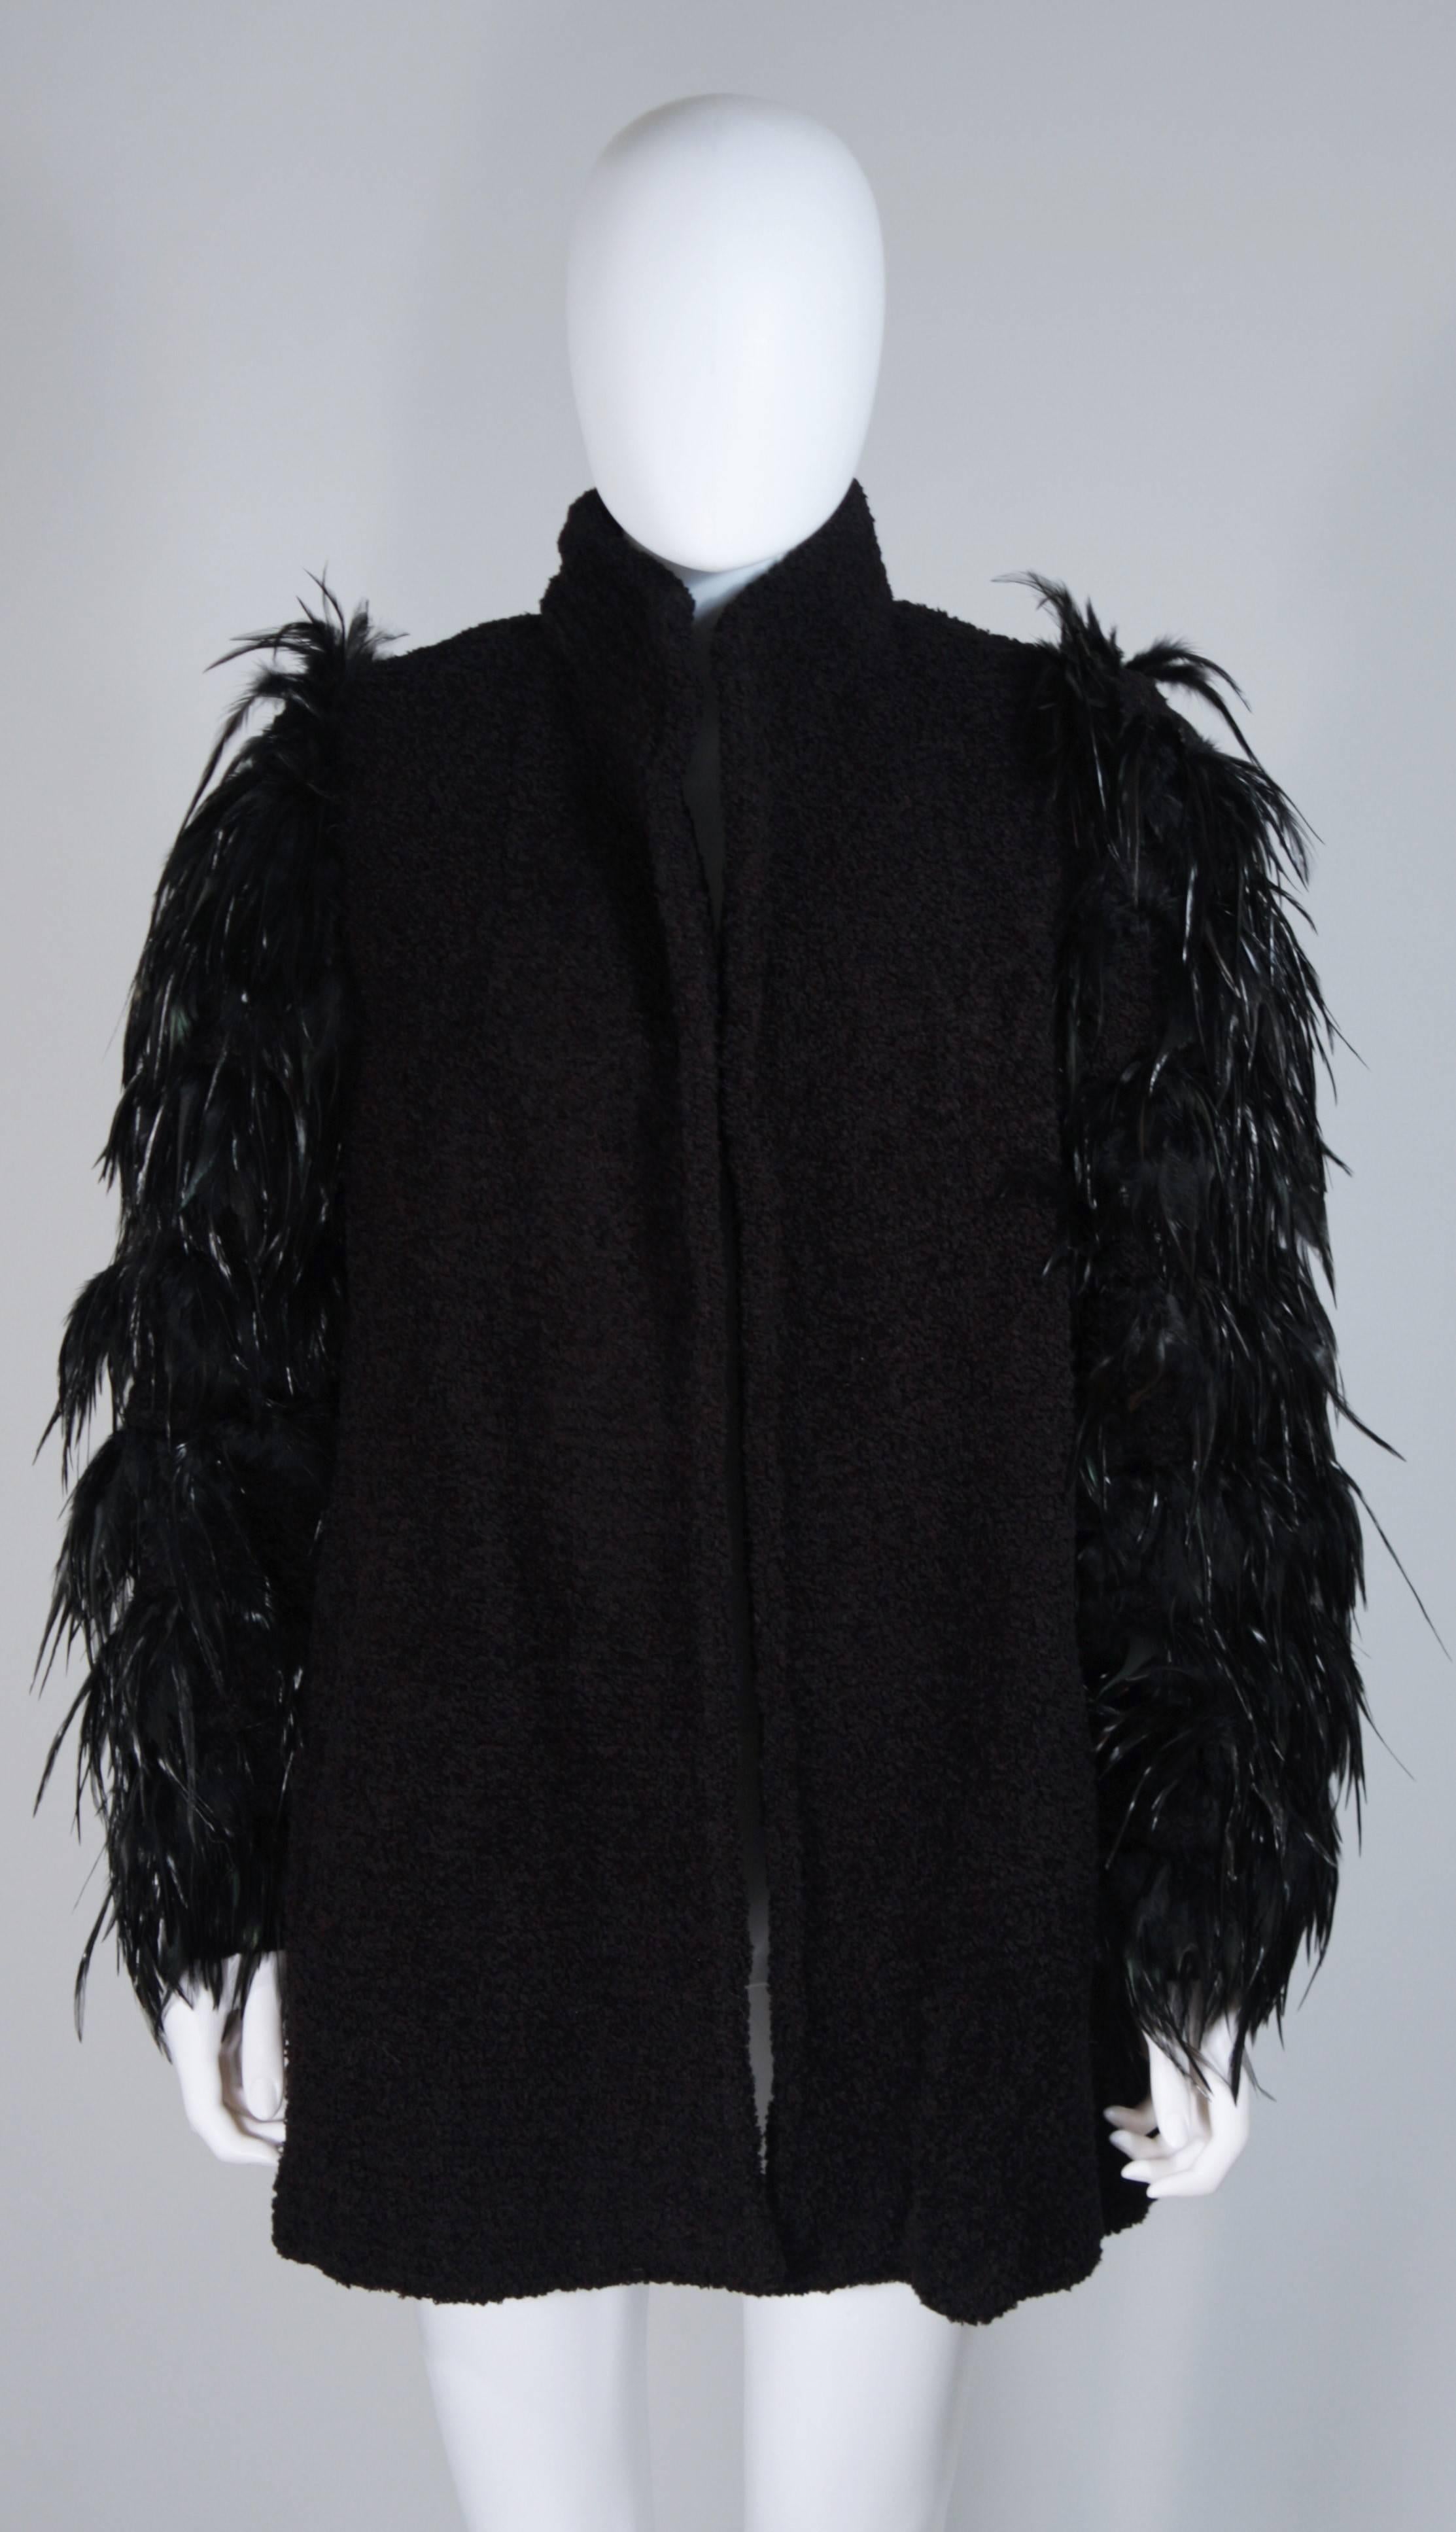 Black TED LAPIDUS Circa 1980's Lana Wool Jacket with Feather Sleeve Details